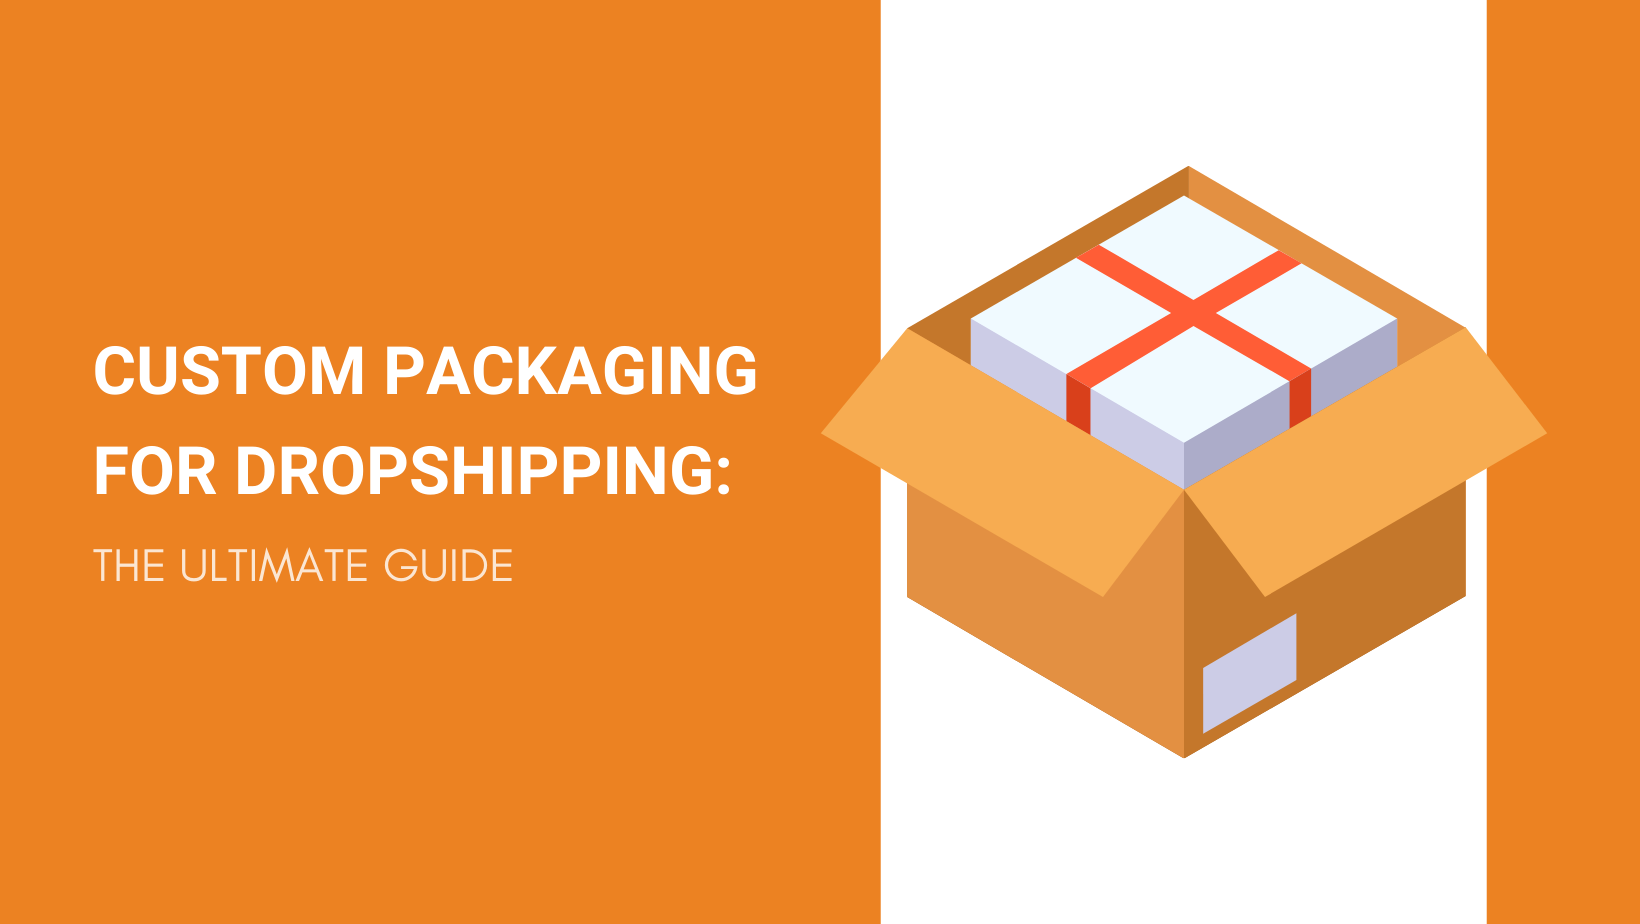 CUSTOM PACKAGING FOR DROPSHIPPING THE ULTIMATE GUIDE